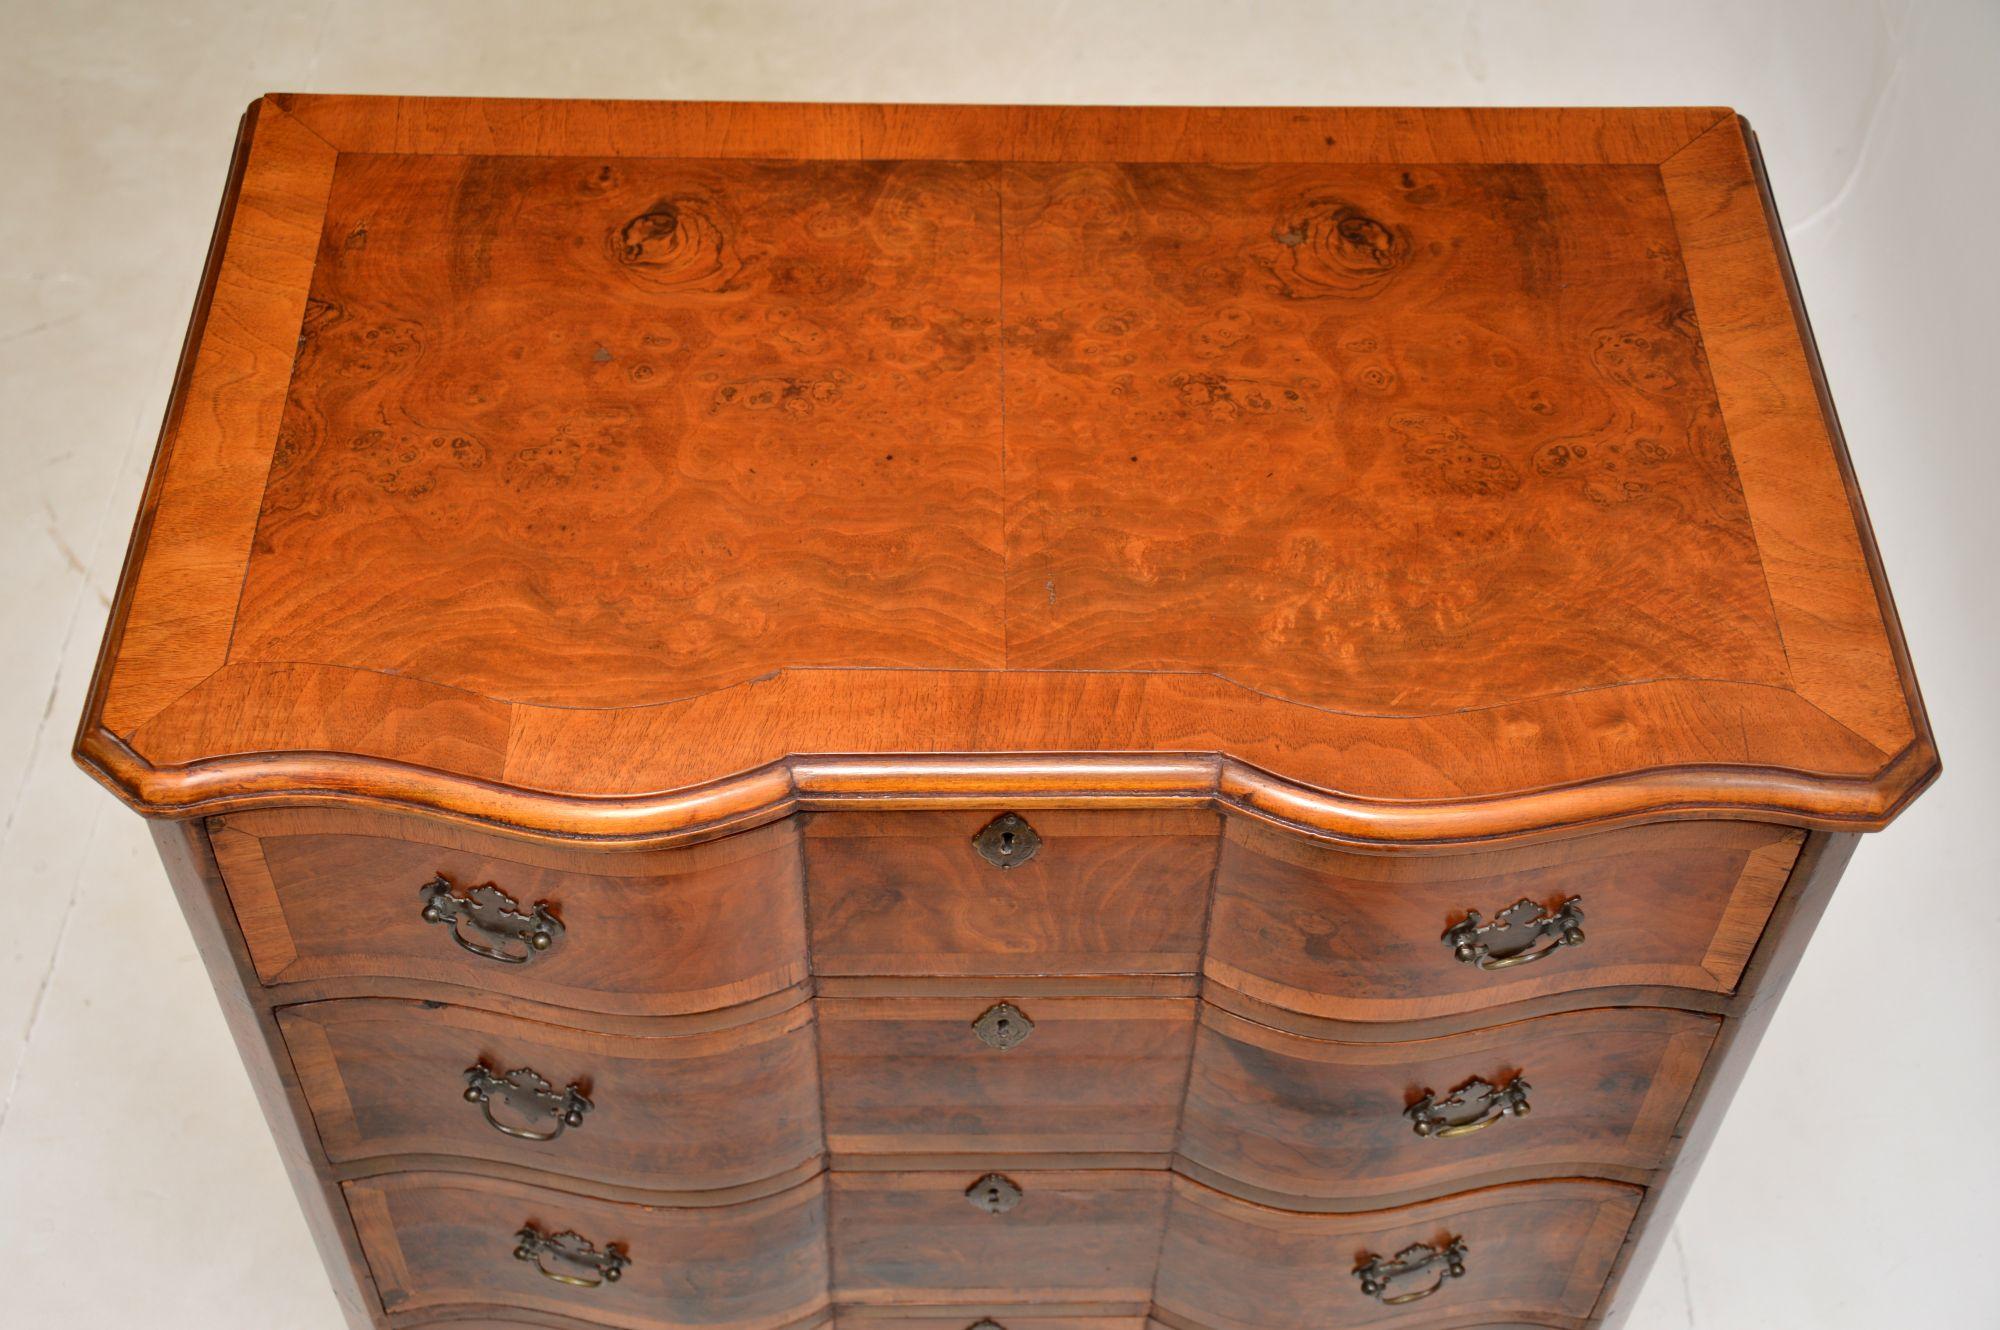 Early 20th Century Antique Burr Walnut Chest of Drawers